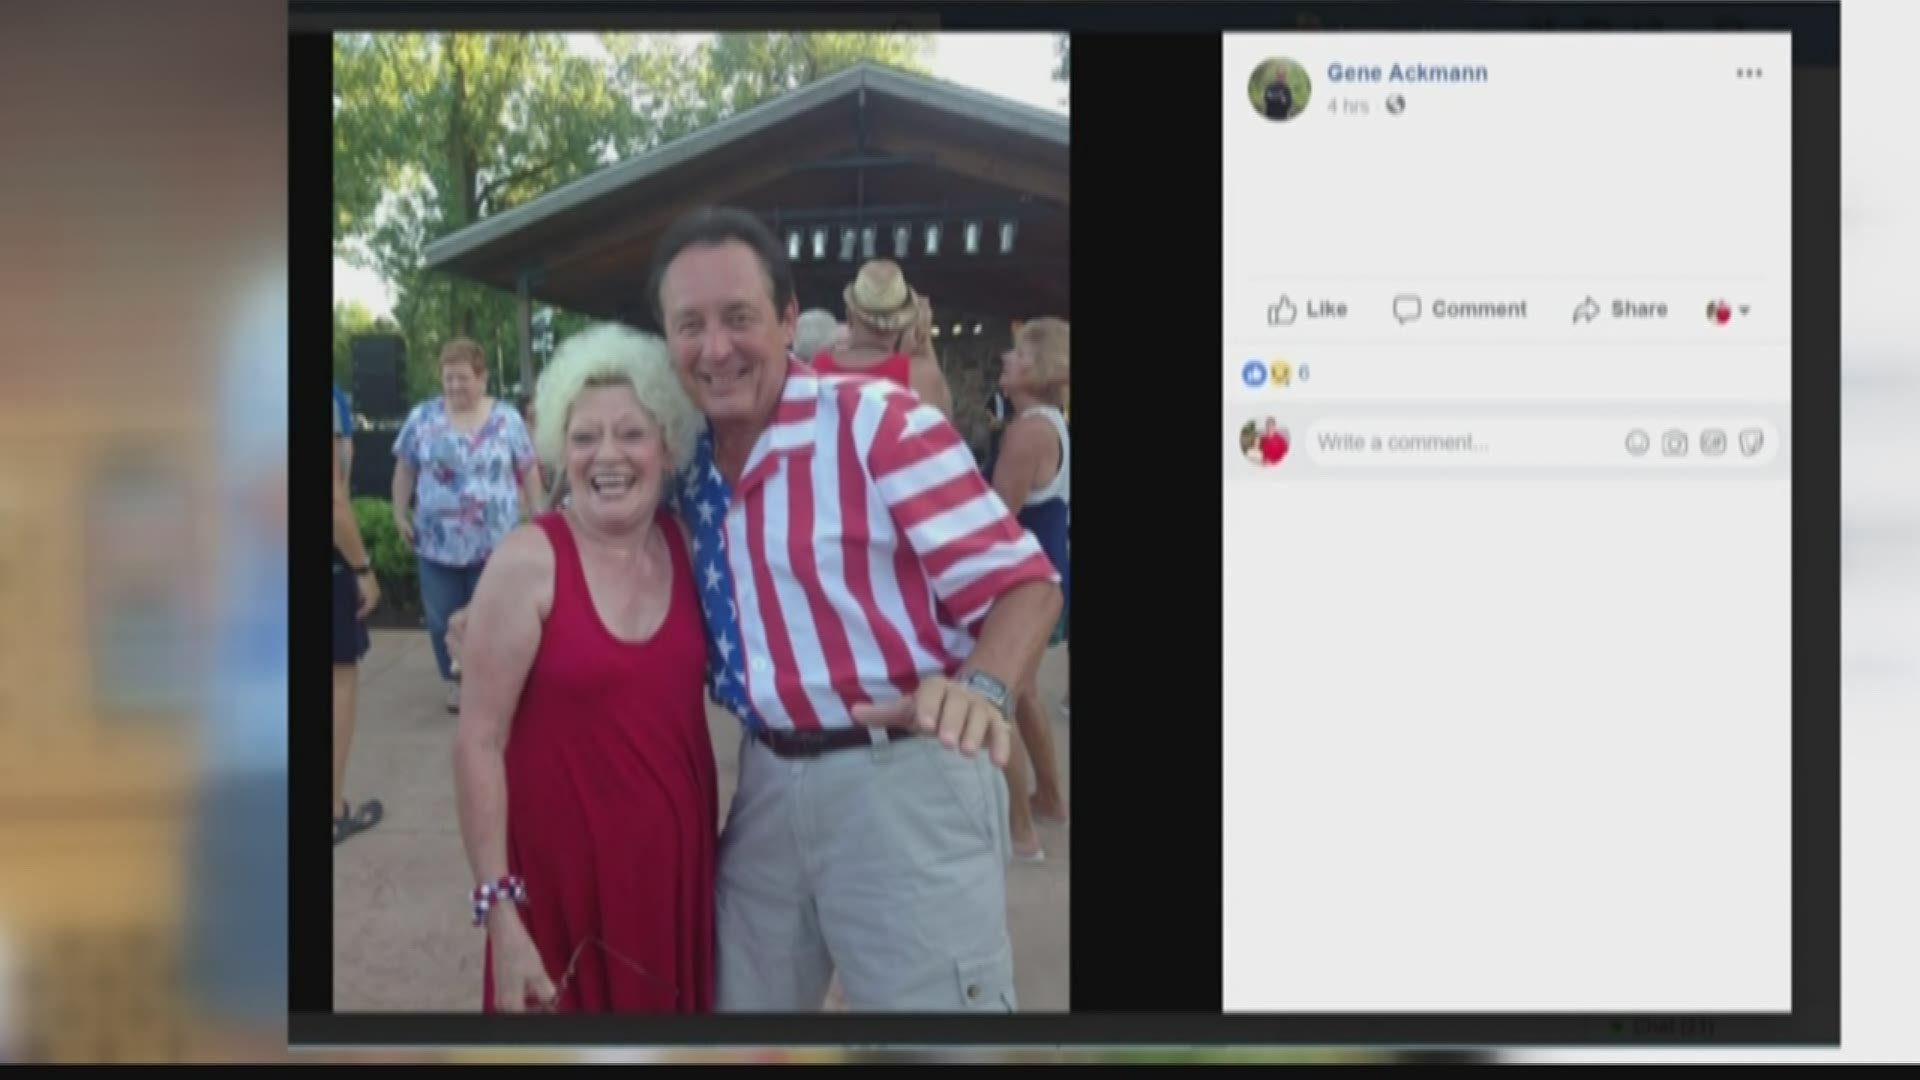 The couple lived in Affton and are being memorialized online by dozens of friends and family members.